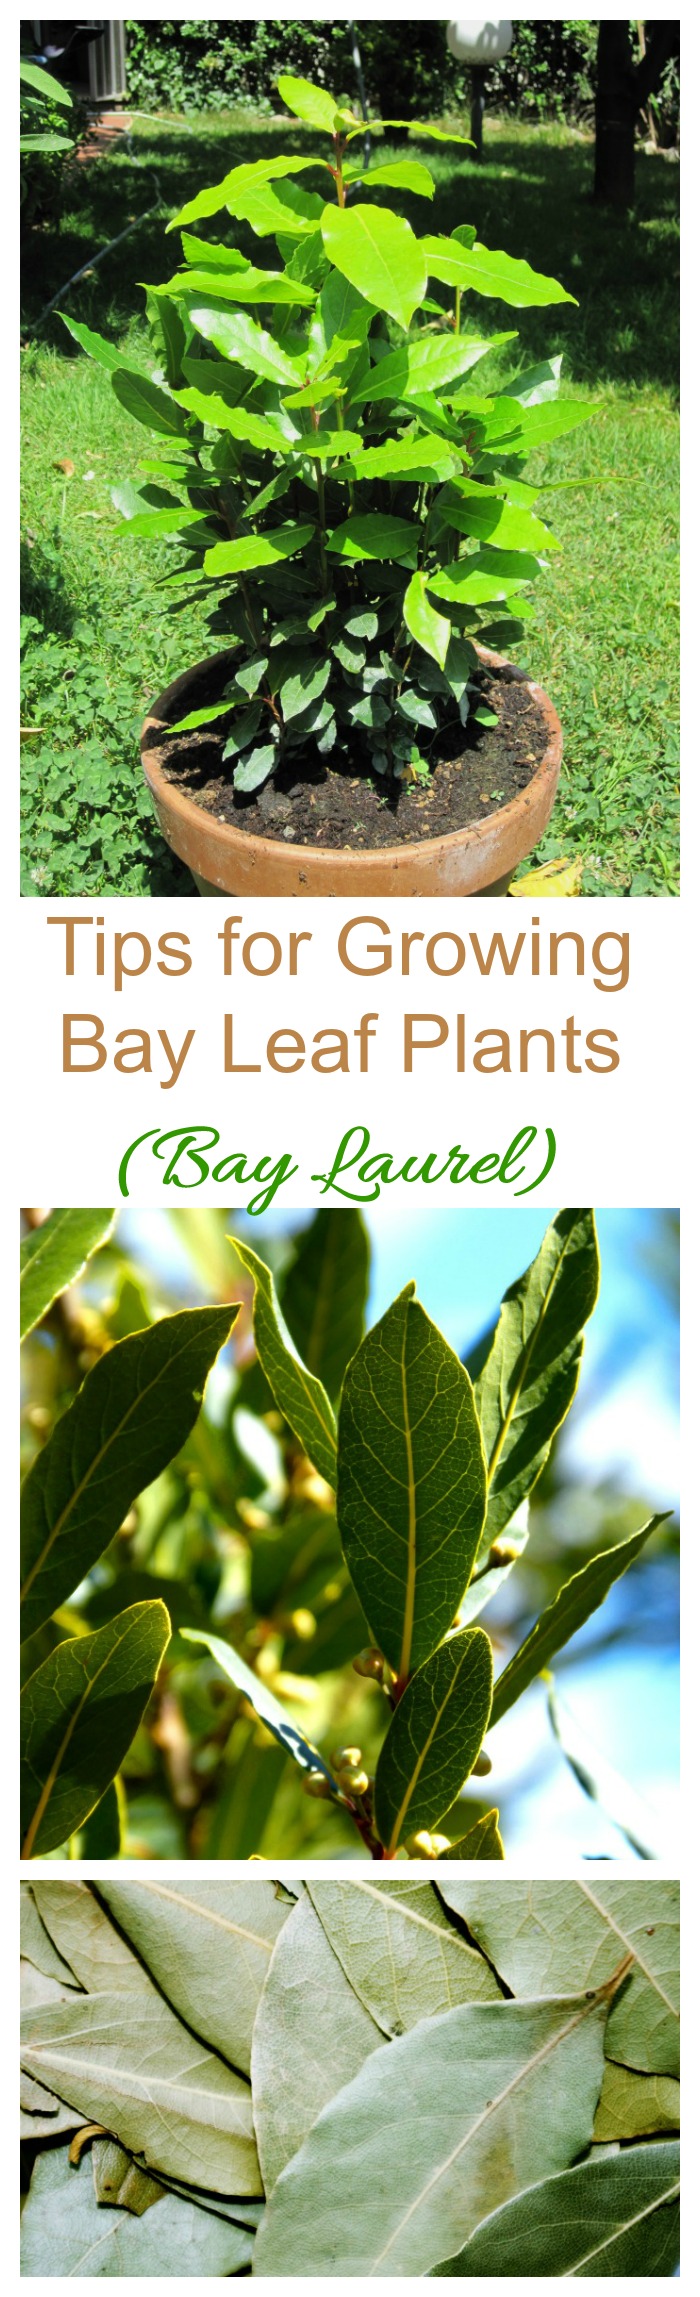 The bay leaf plant is also known as bay laurel. It can be grown in containers or as a tree or shrub in warmer zones #bayleafplalnts #baylaurel